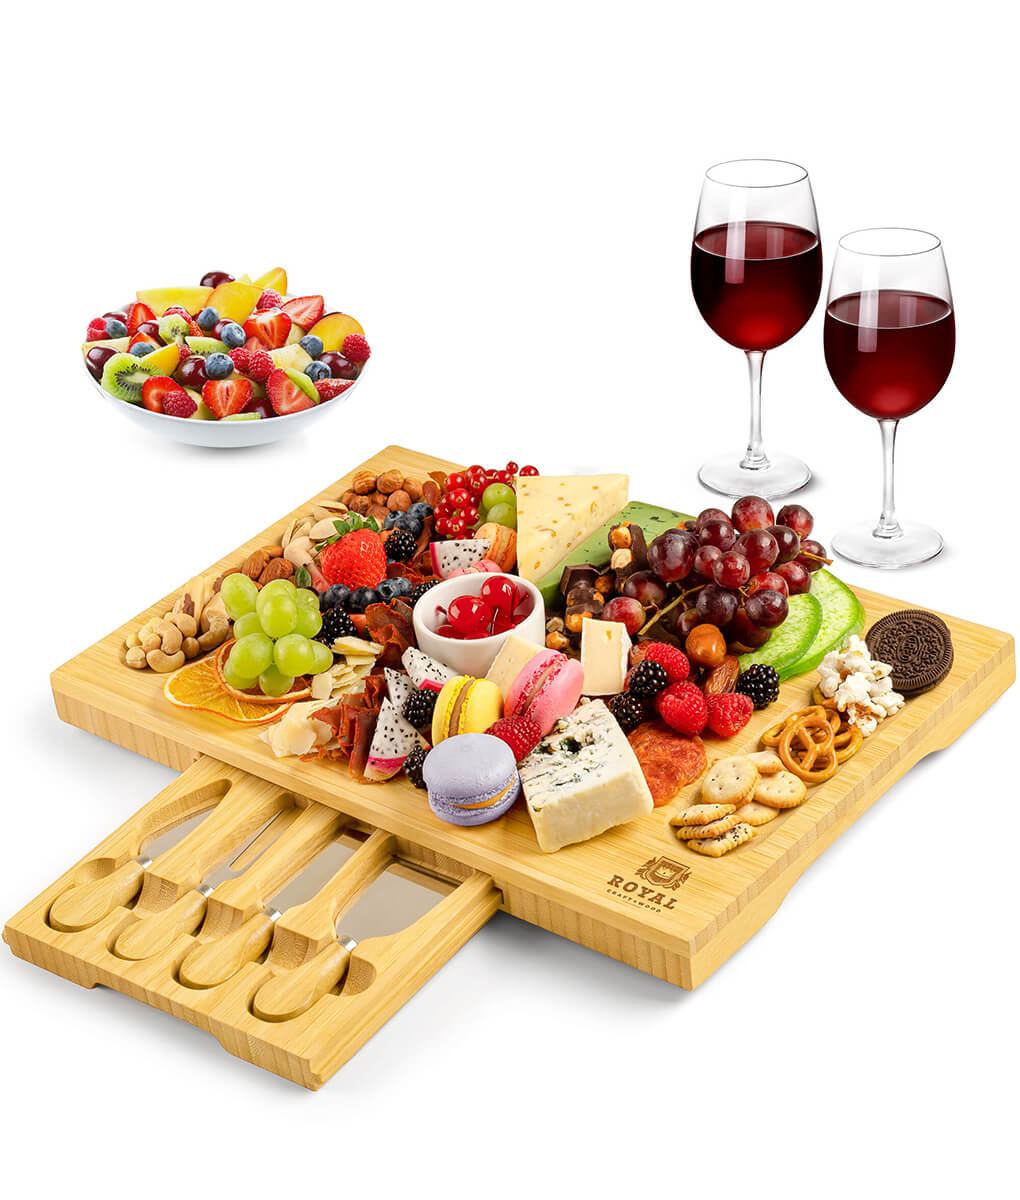 Royal Craft Wood Round Cheese Board, 1 - Fry's Food Stores